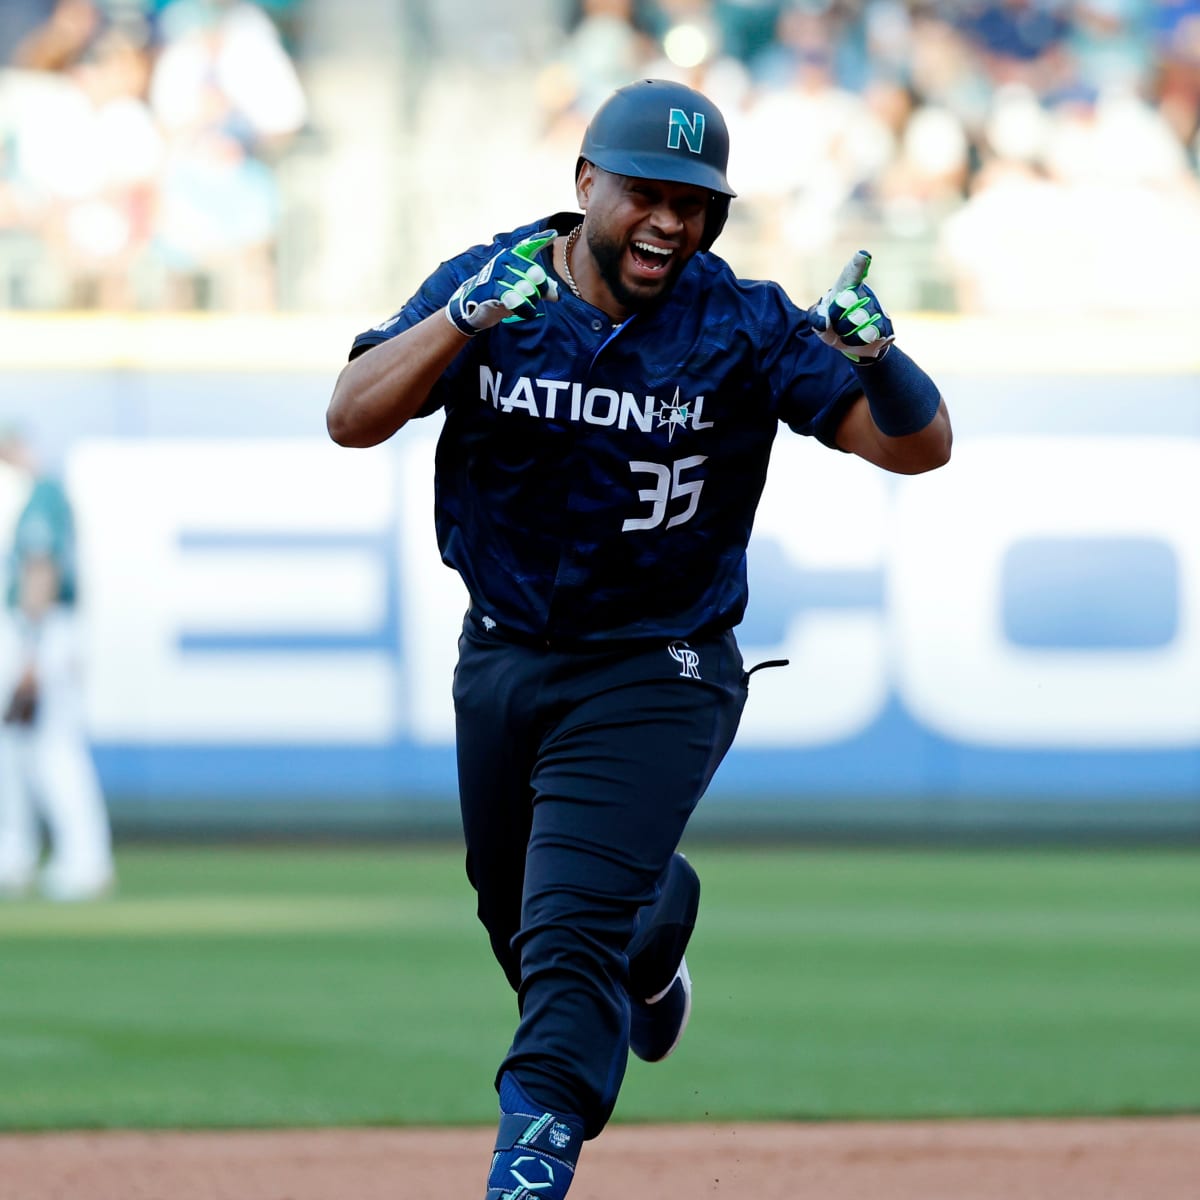 ALL-STAR GAME: National League wins 3-2 at T-Mobile Park on Elias Diaz home  run